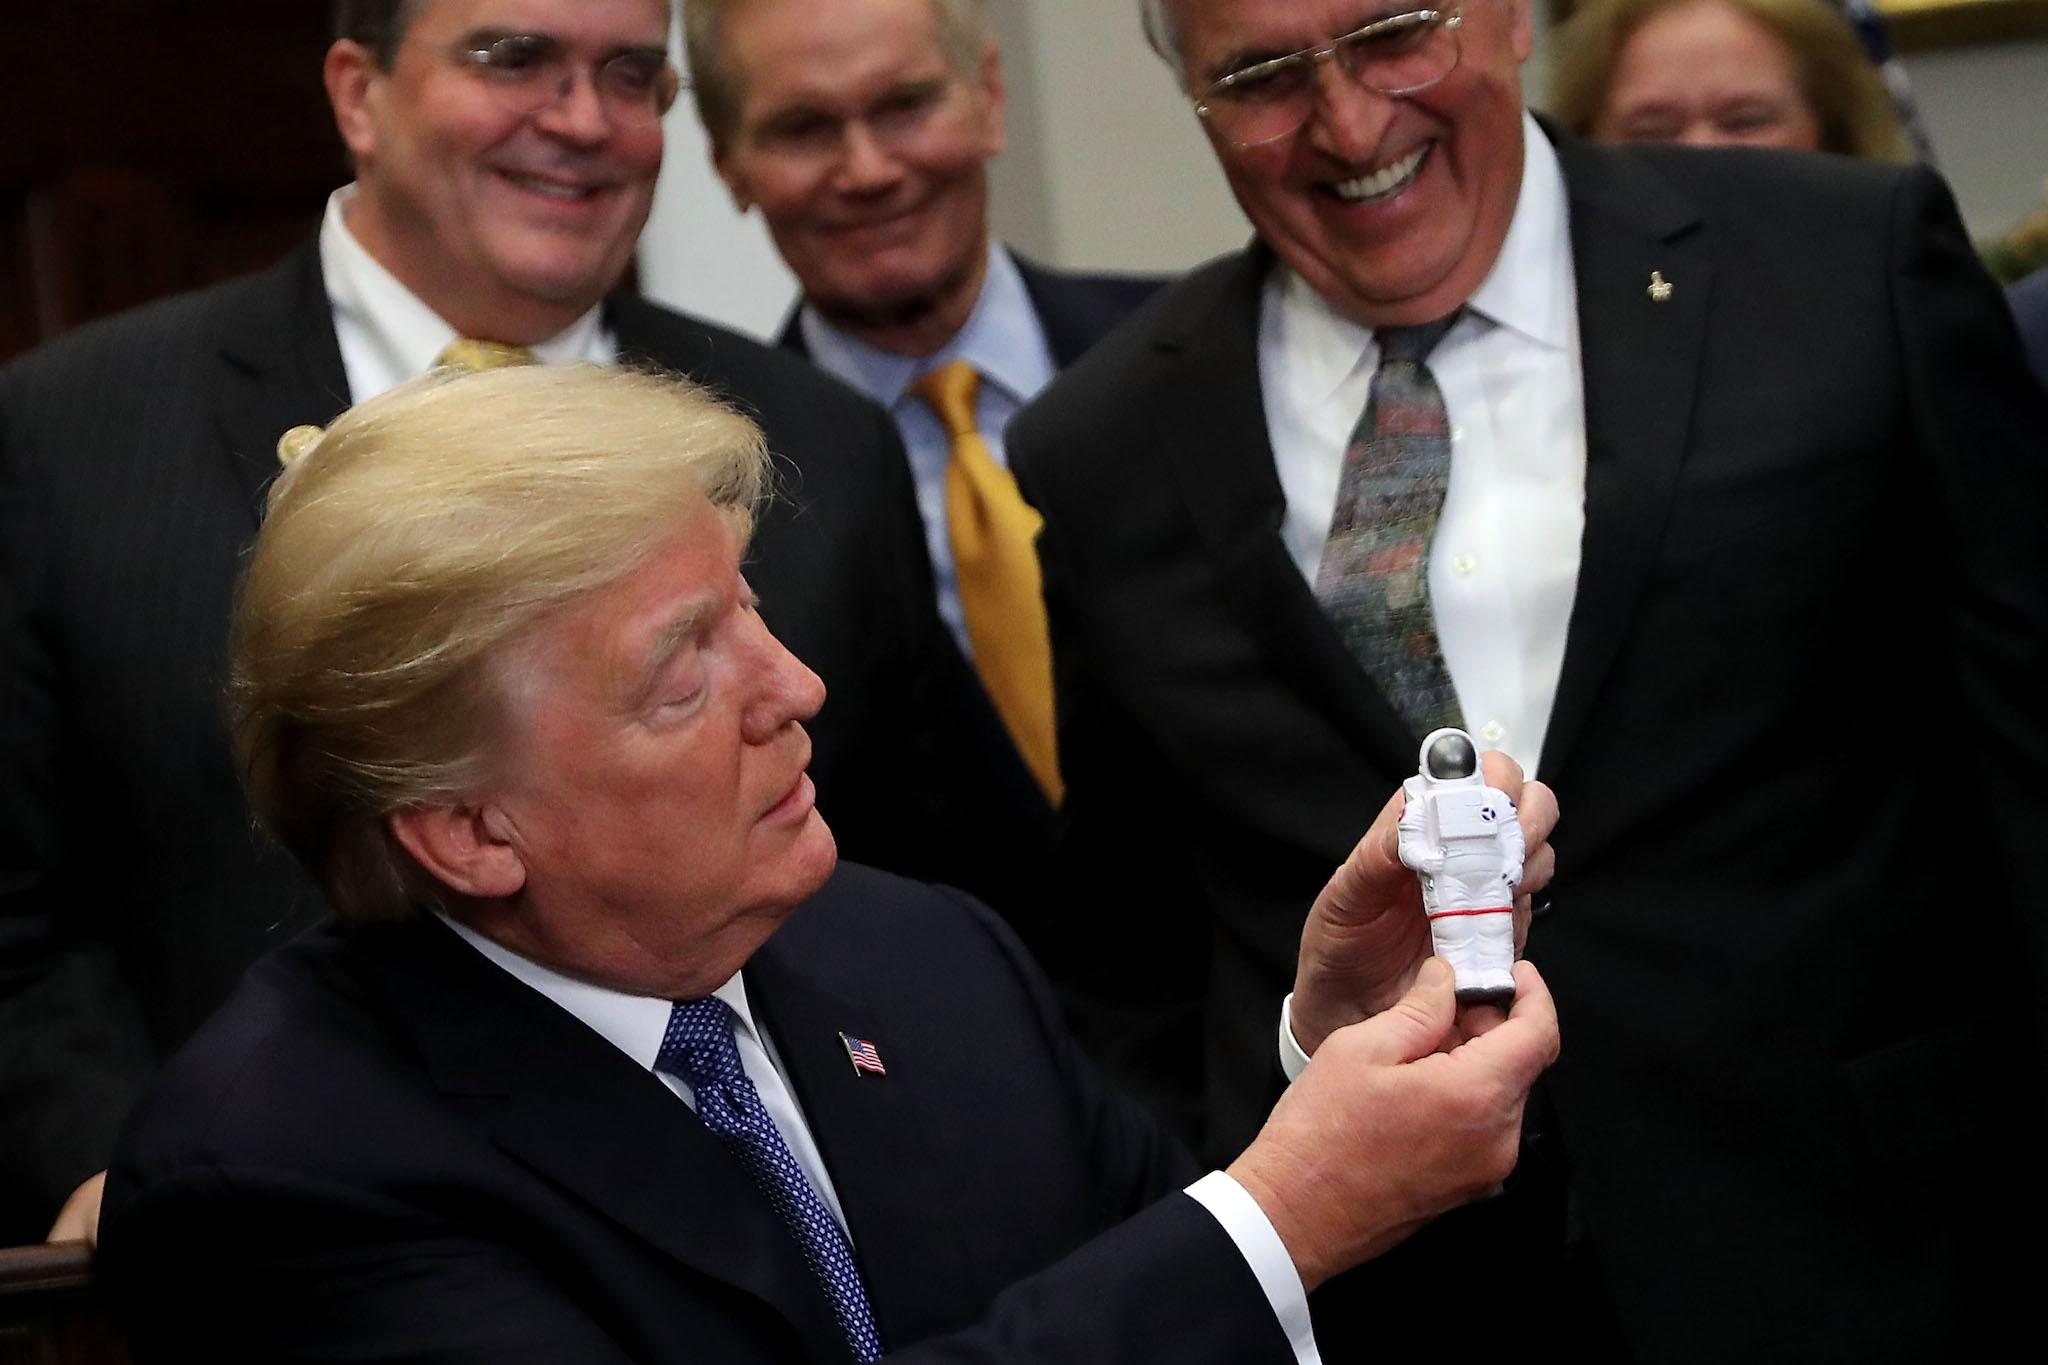 U.S. President Donald Trump holds a plastic astronaut figurine given to him by Apollo 17 astronaut and former U.S. Senator Jack Schmitt during a signing ceremony for 'Space Policy Directive 1' in the Roosevelt Room at the White House December 11, 2017 in Washington